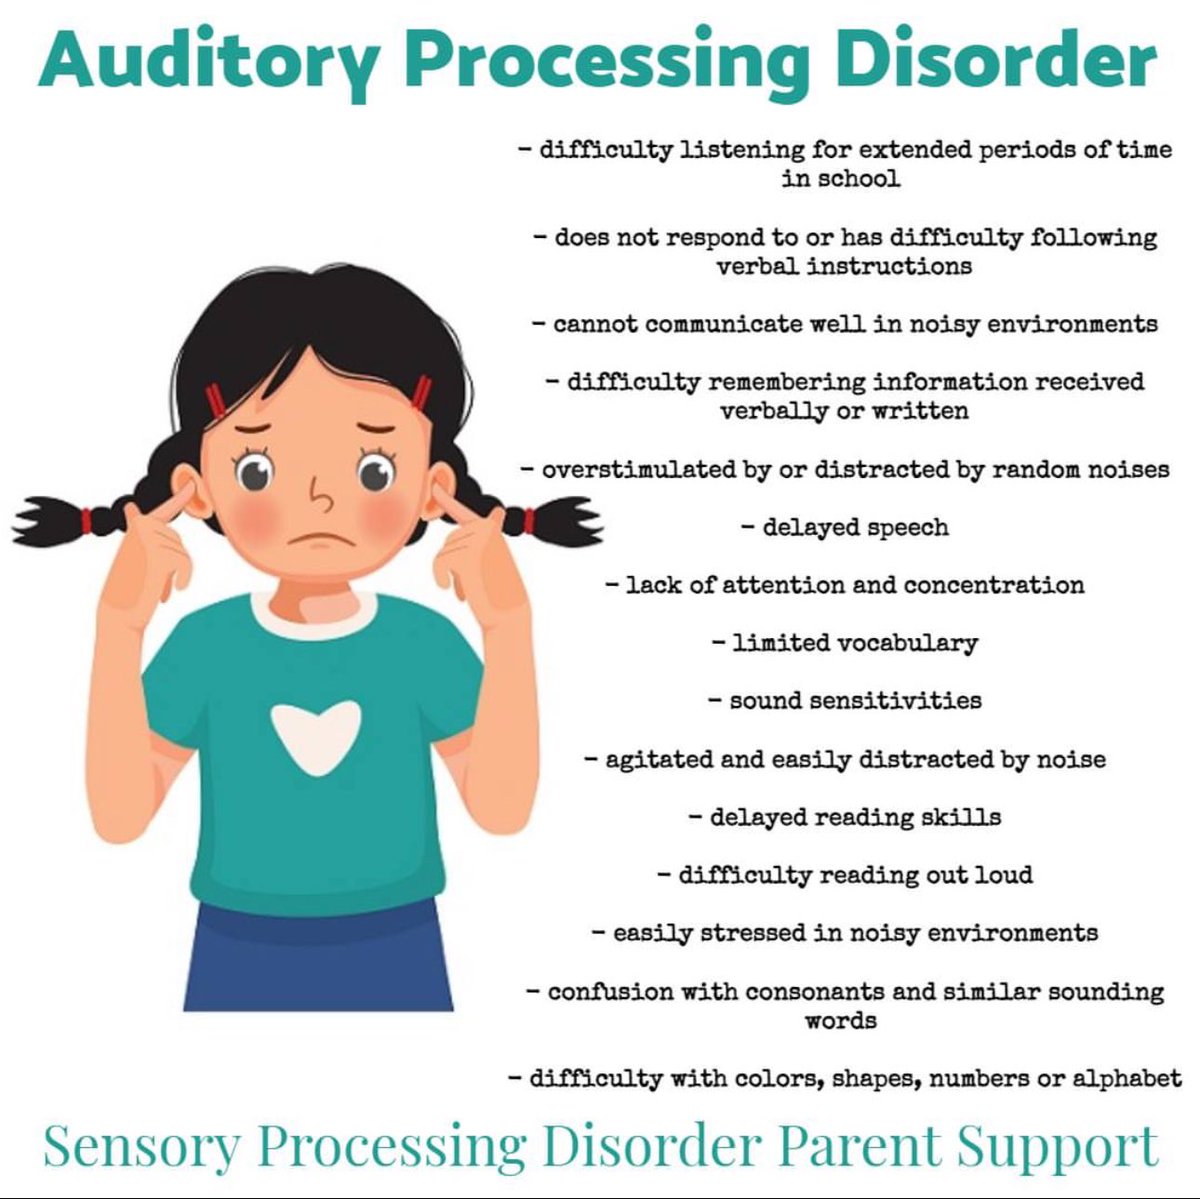 Apply patience and kindness with individuals who manage auditory processing disorder. These individuals are working very hard. Let work just as hard to give them understanding. 🧡💛 #everydayautism #autism #inclusion
#autismacceptance #autismawareness #autismmom #whollycommitted